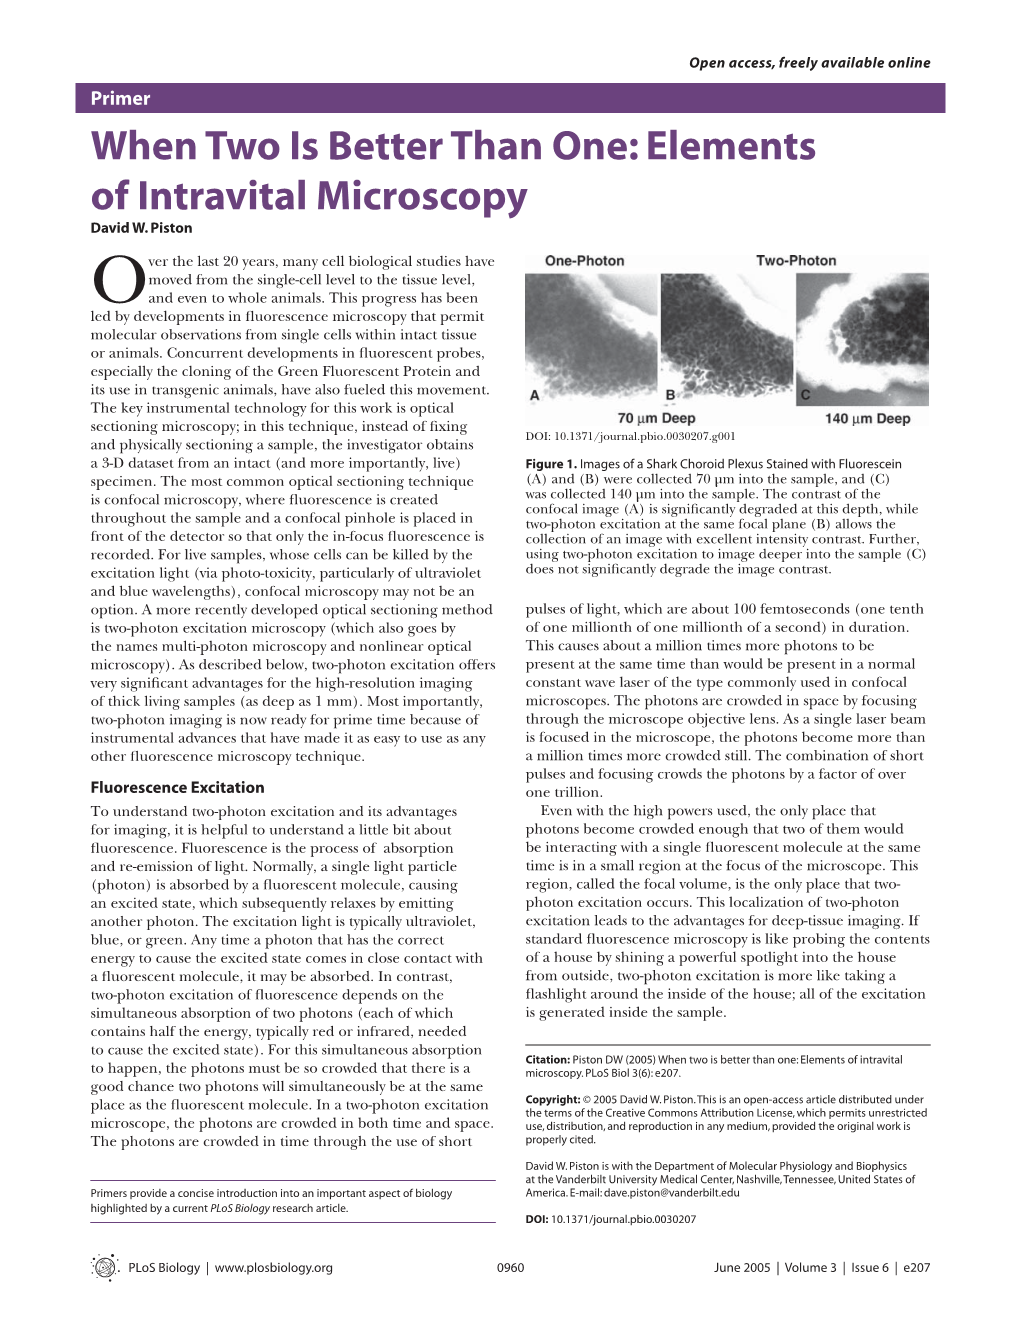 When Two Is Better Than One: Elements of Intravital Microscopy David W